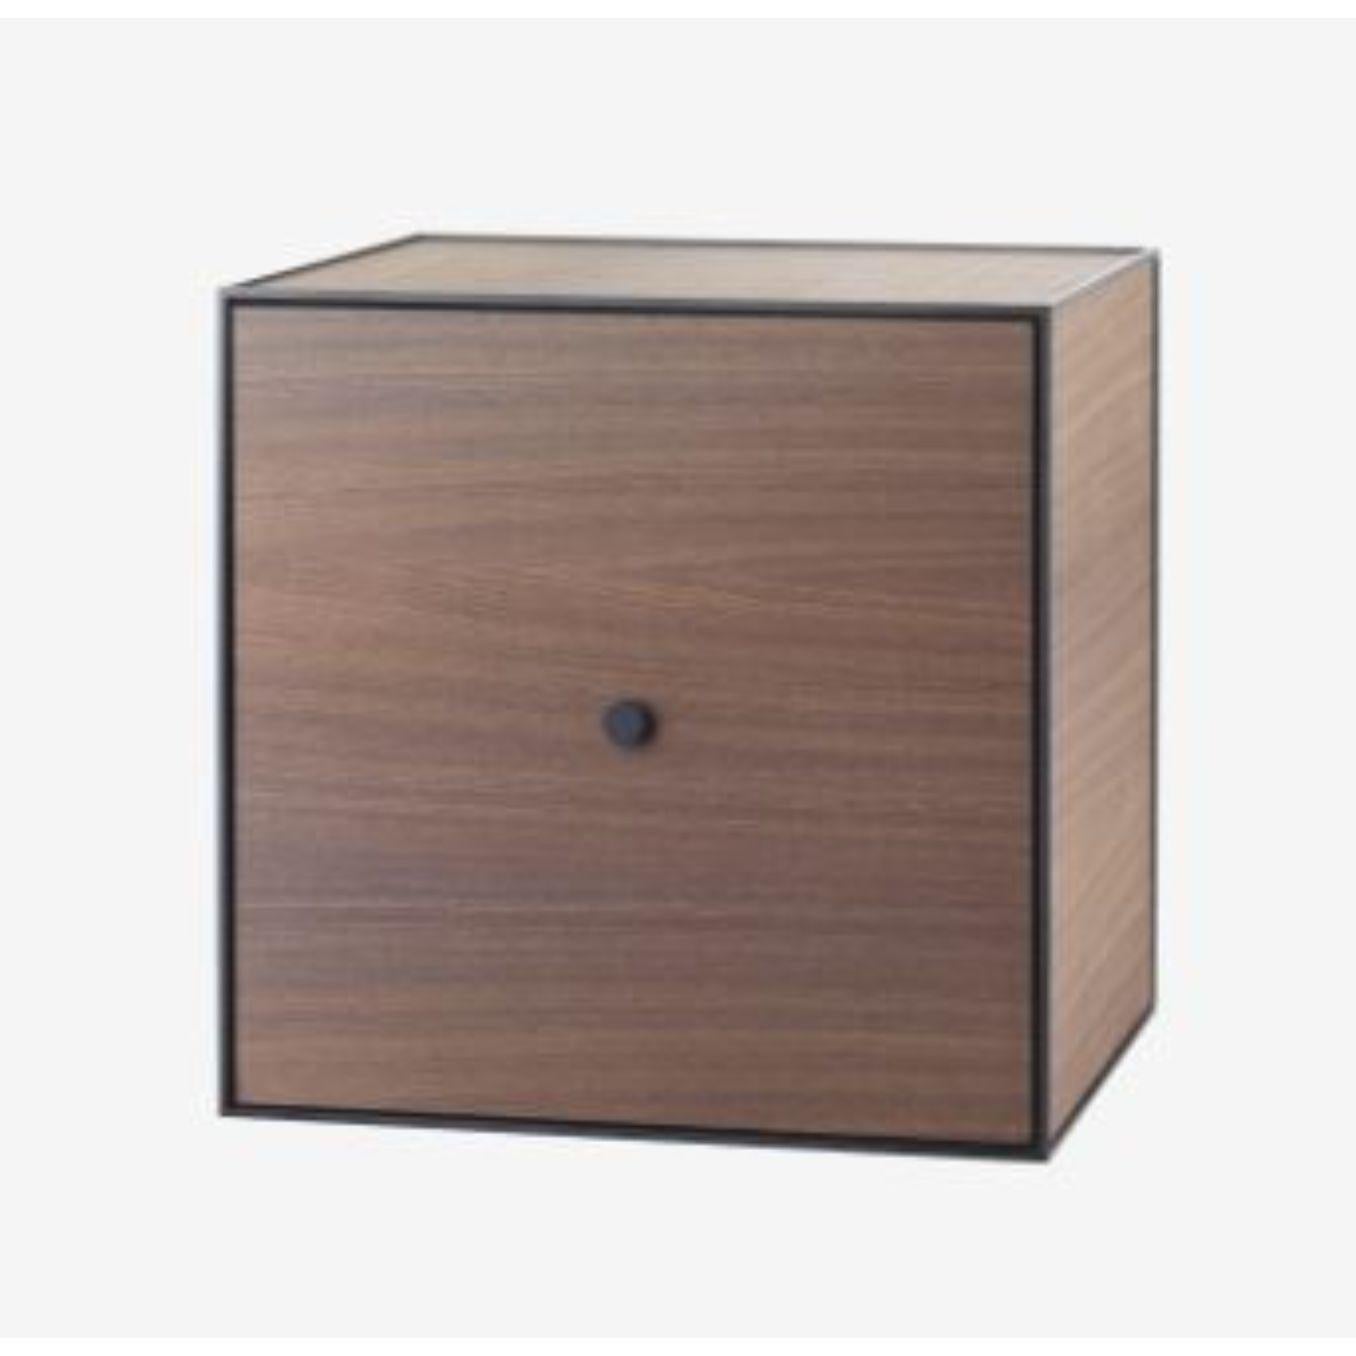 49 oak frame box with door / shelf by Lassen.
Dimensions: D 49 x W 42 x H 49 cm. 
Materials: Finér, Melamin, Melamin, Melamine, Metal, Veneer, Oak.
Also available in different colours and dimensions. 
Weight: 17 Kg.


By Lassen is a Danish